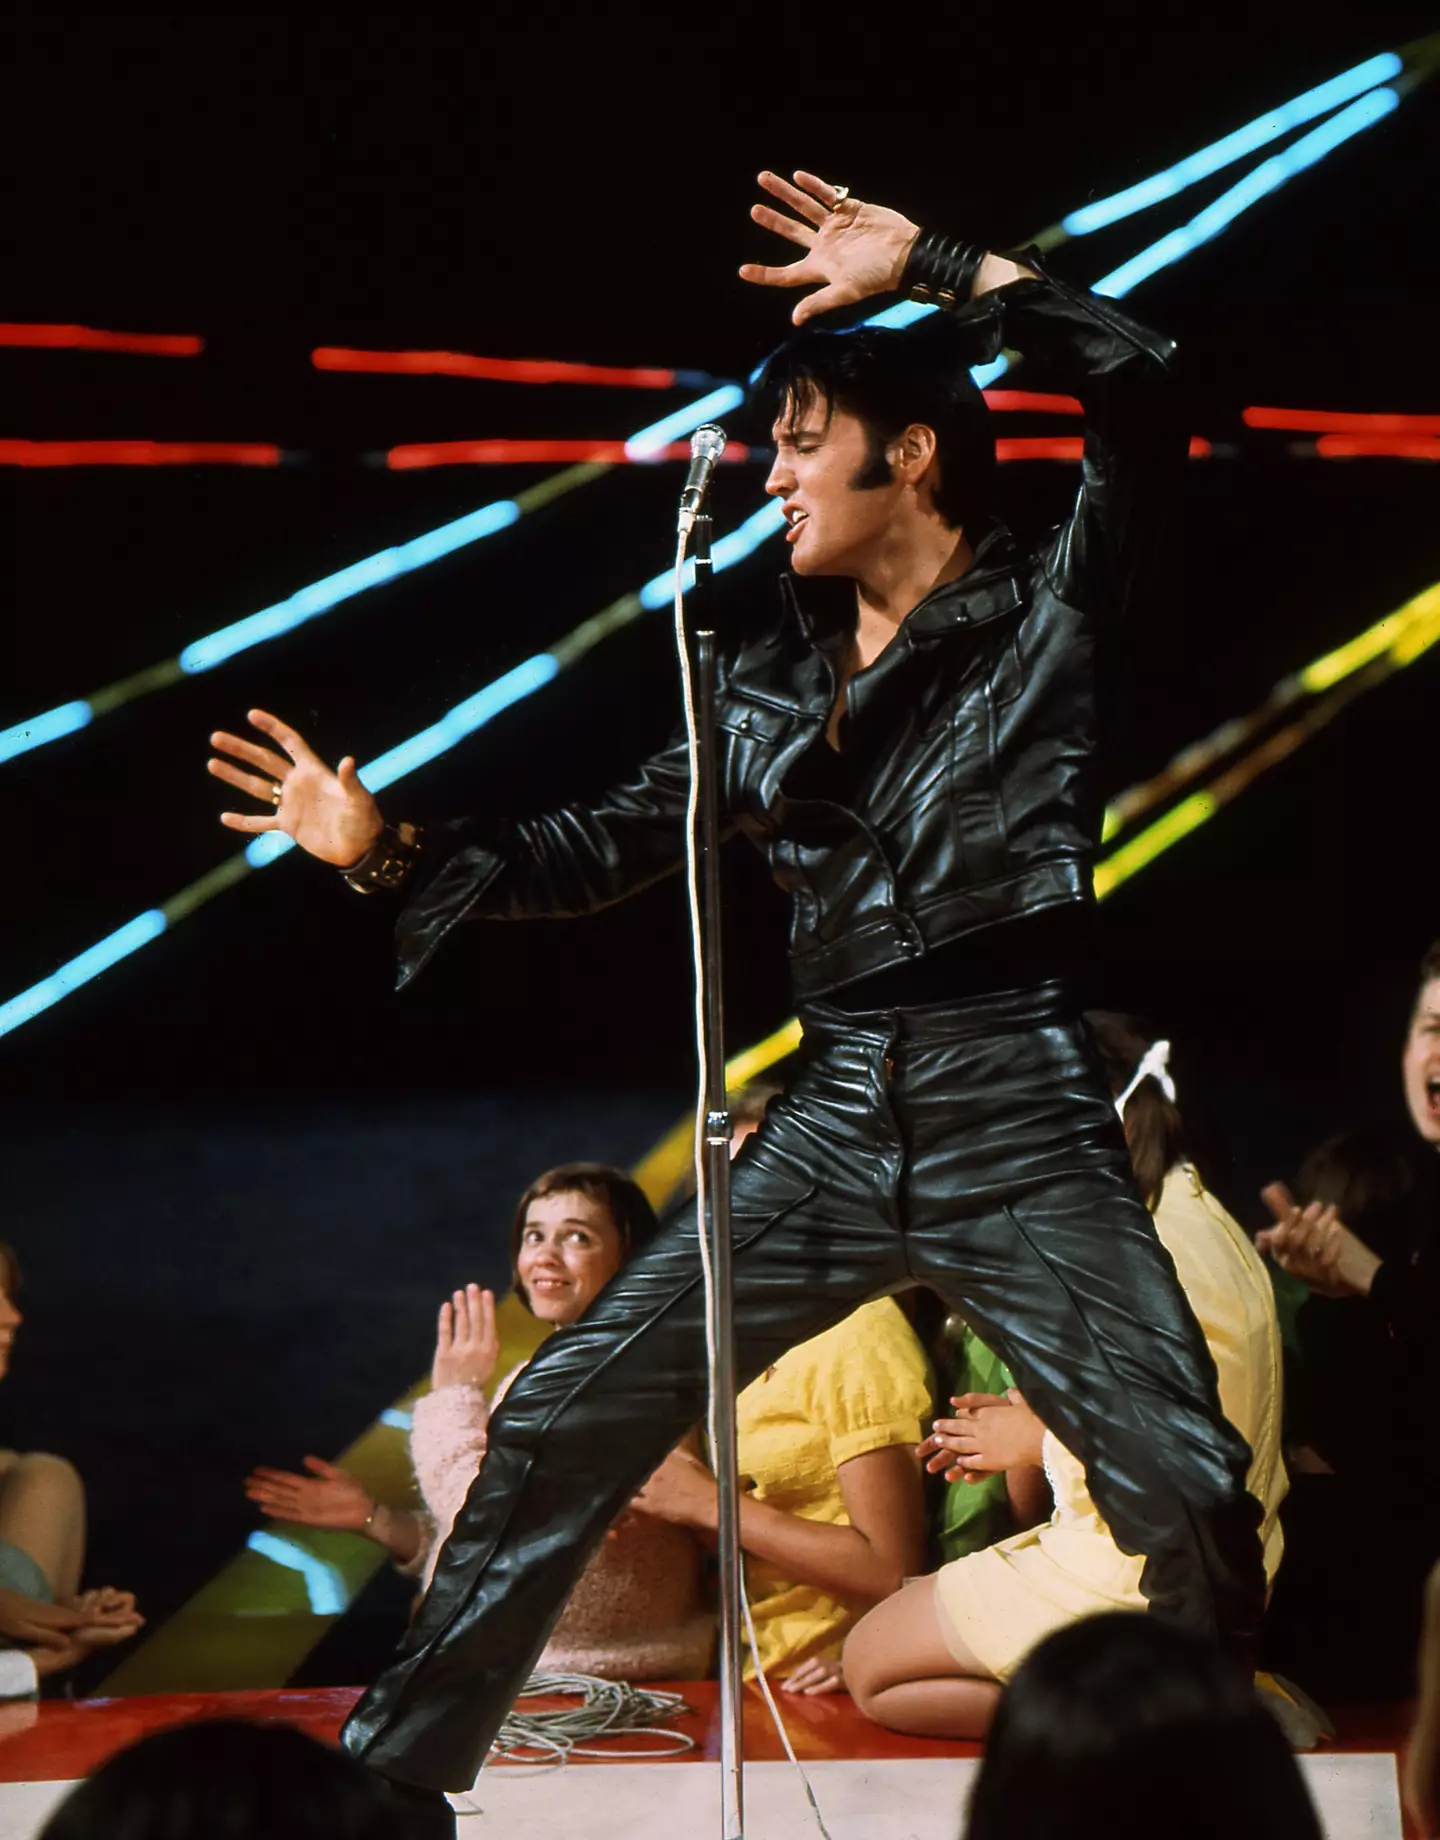 No one was left more shook up than Elvis during his iconic 1968 Comeback Special.